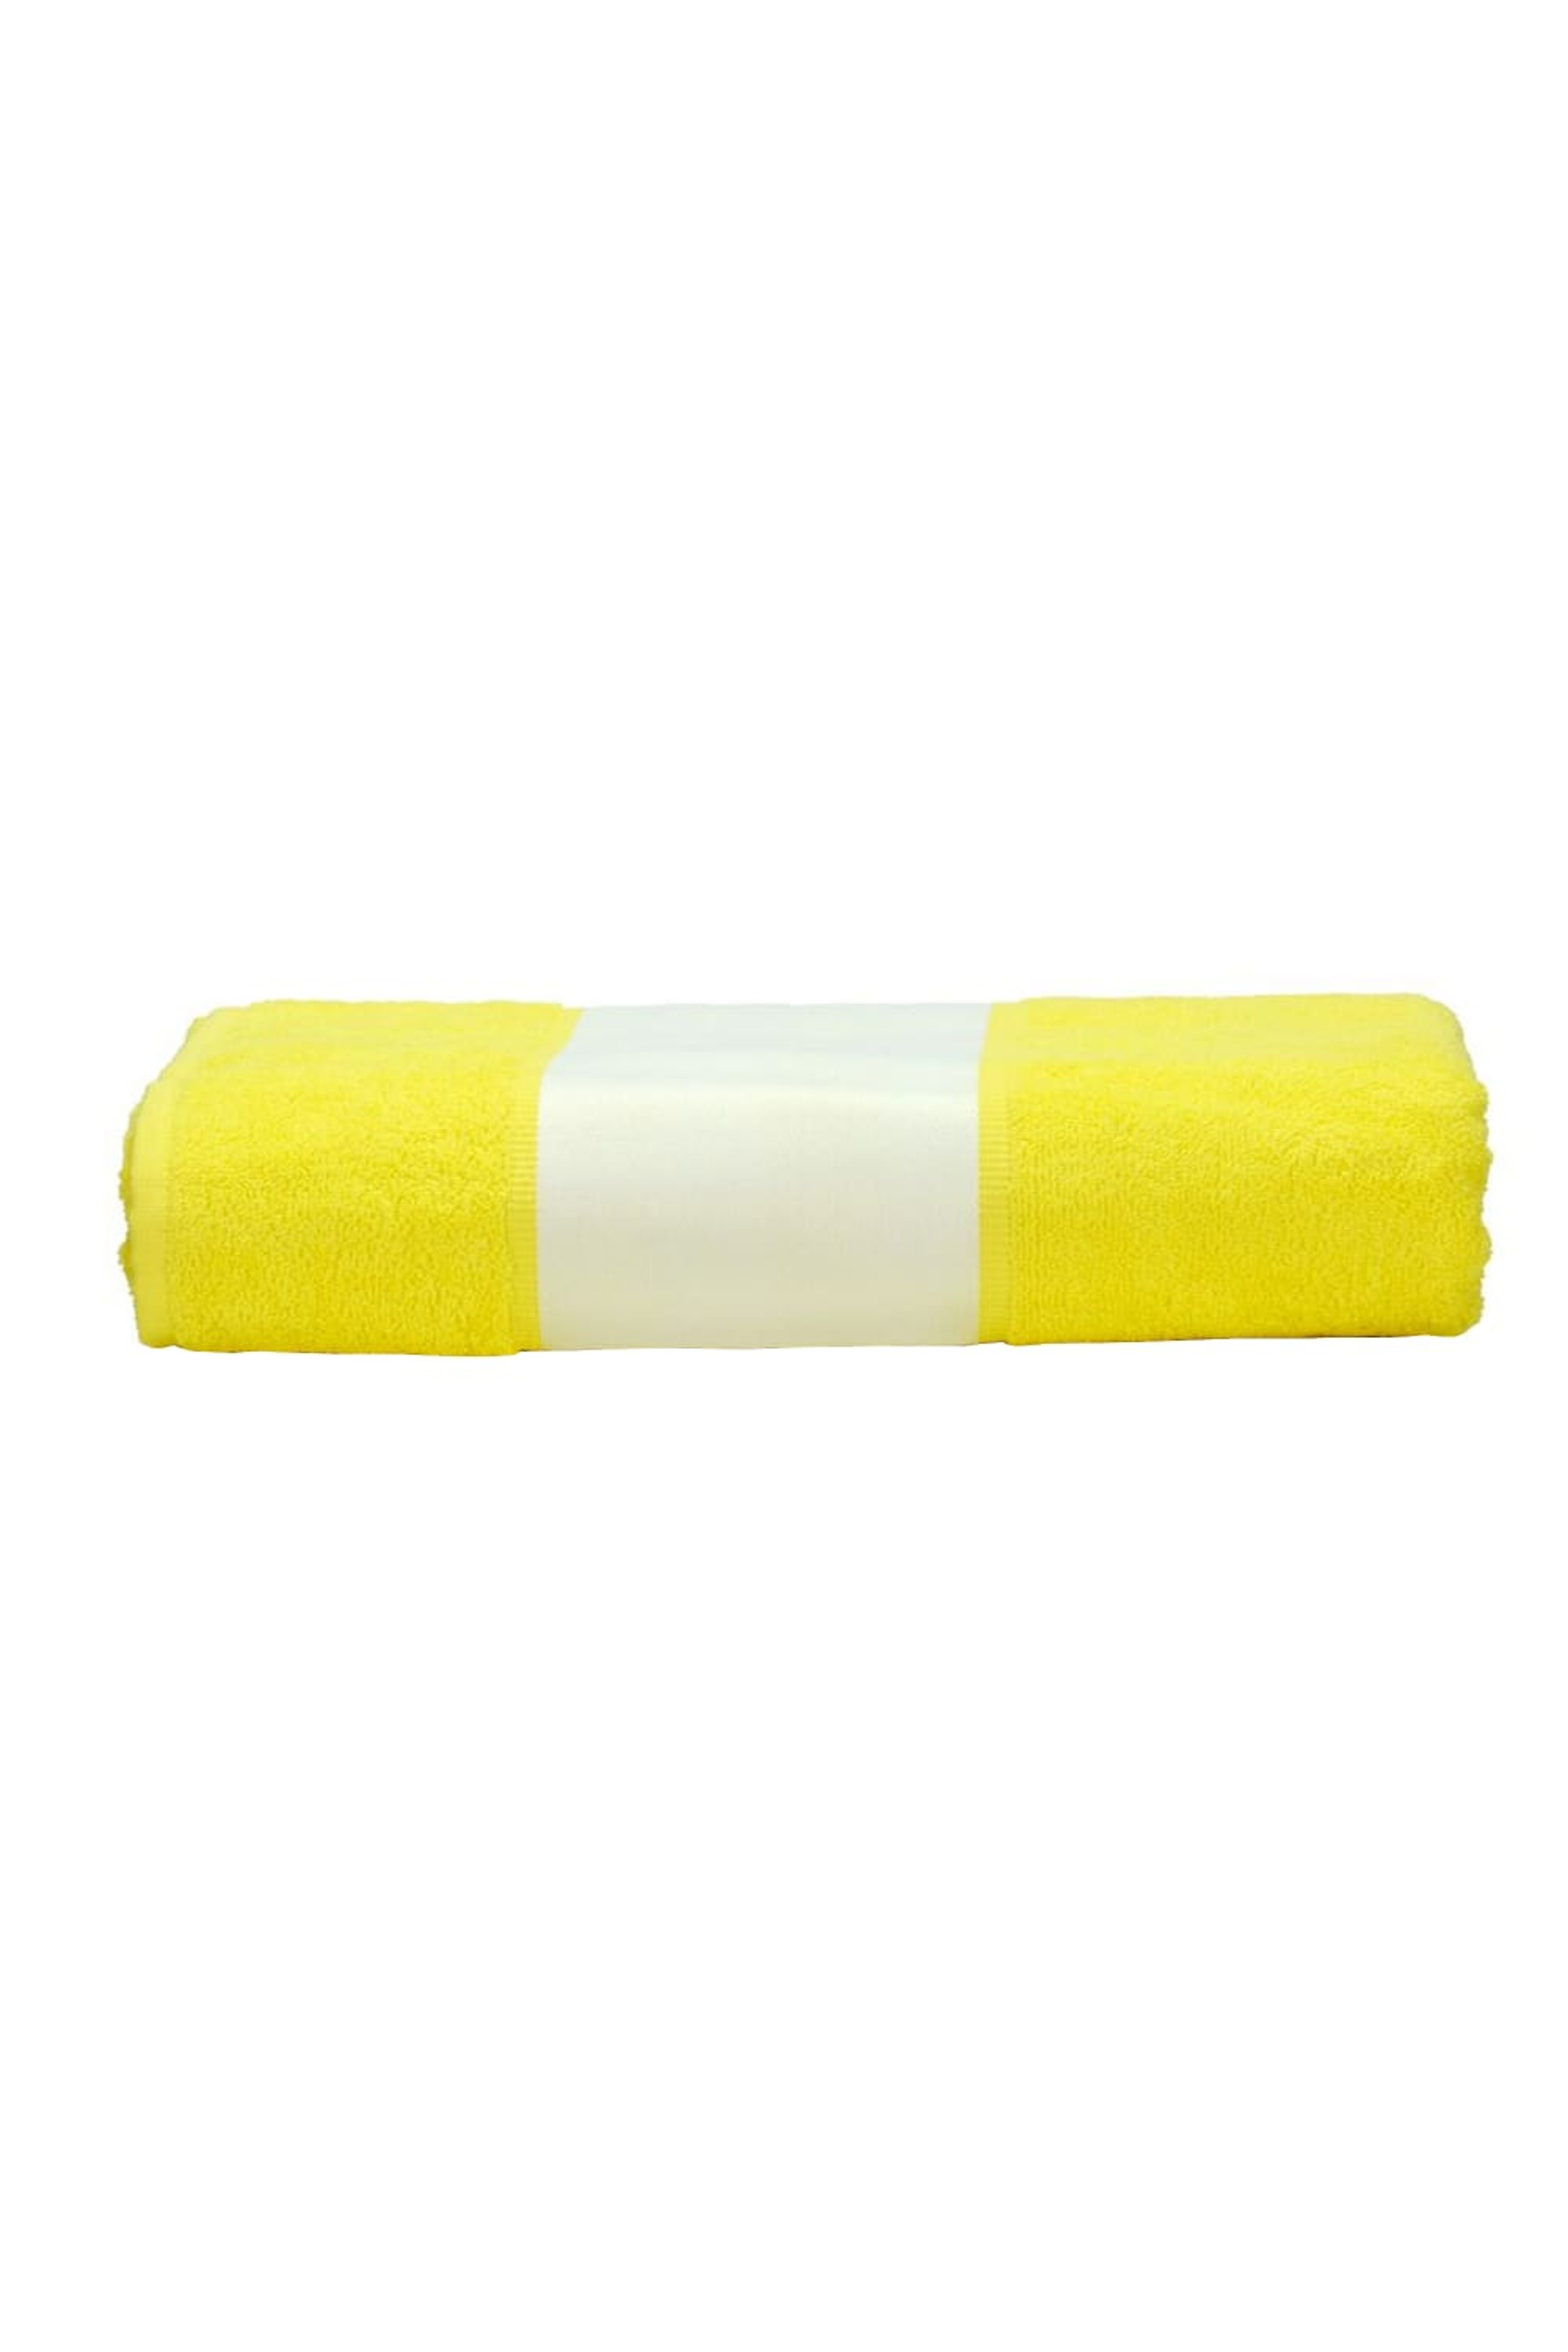 A&R TOWELS A&R TOWELS A&R TOWELS SUBLI-ME HAND TOWEL (BRIGHT YELLOW) (ONE SIZE)